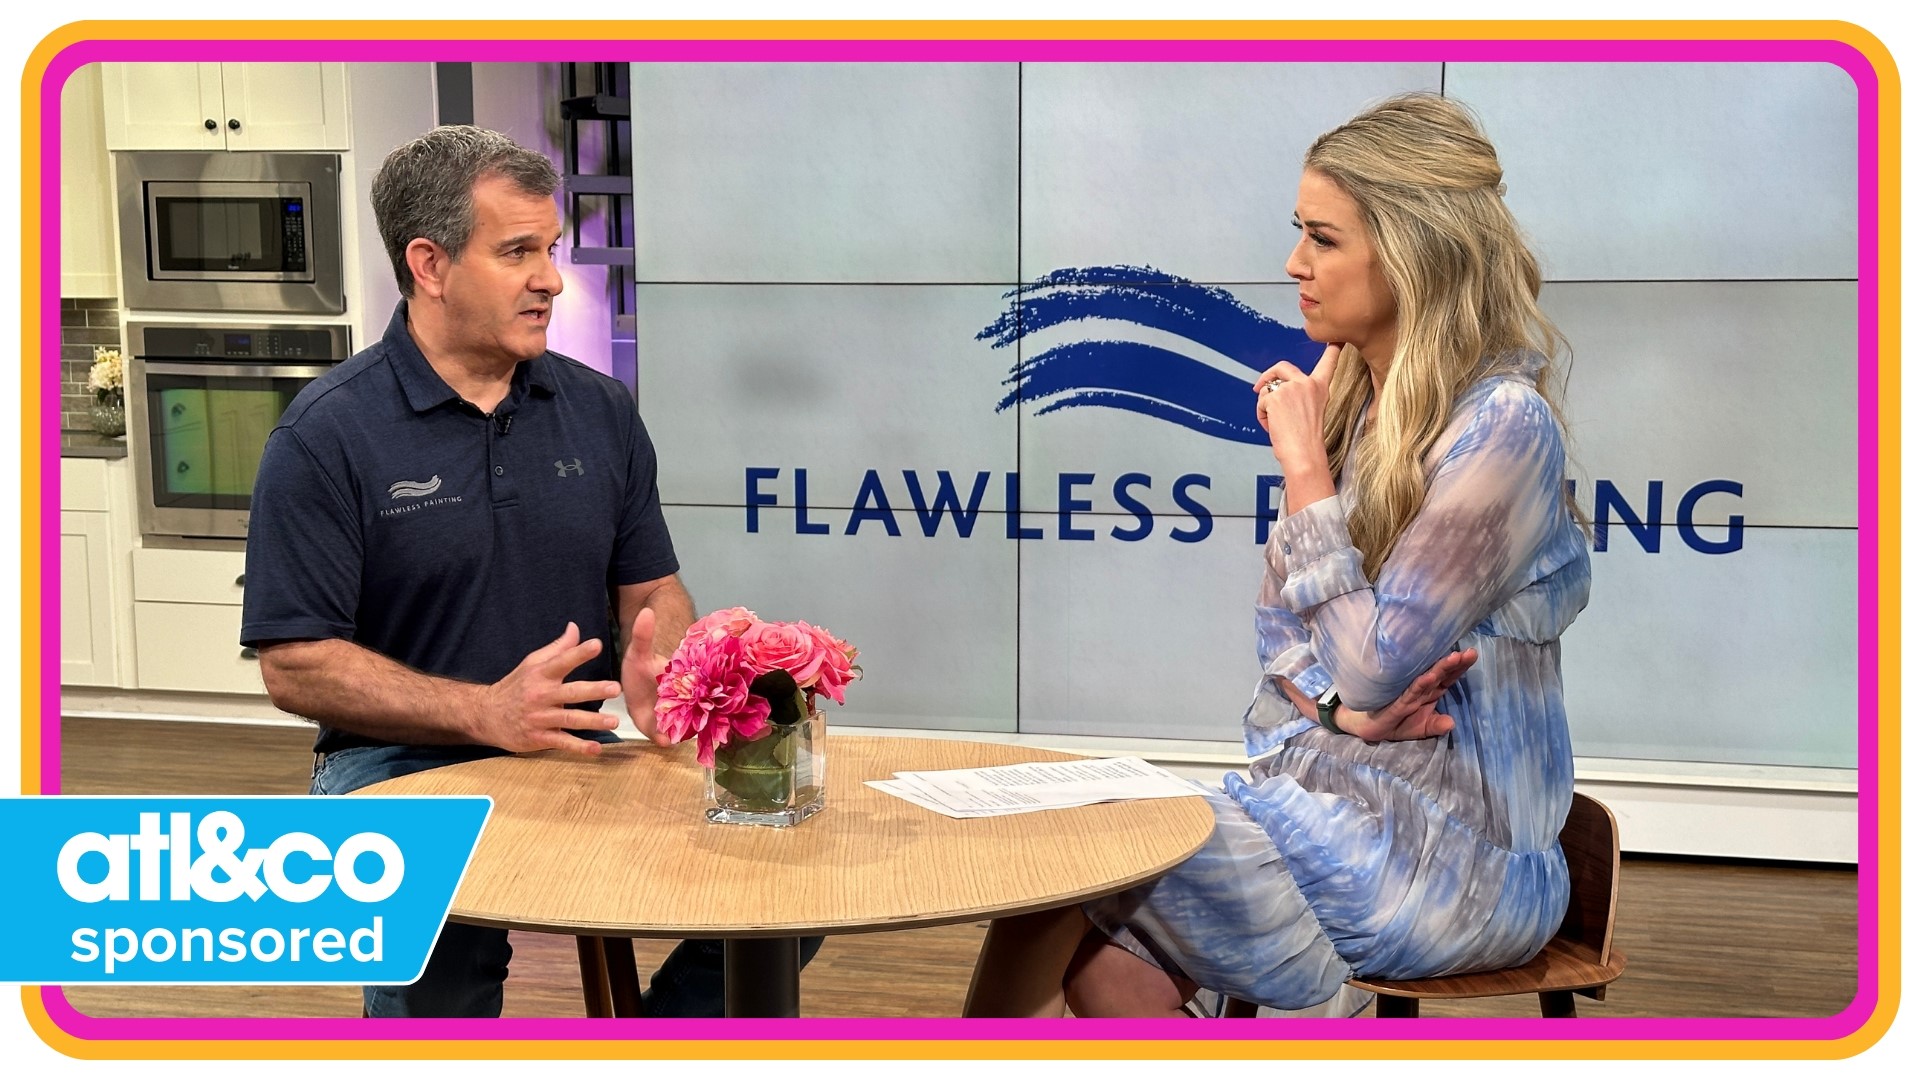 Flawless Painting shares how to give your home a facelift this spring | PAID CONTENT